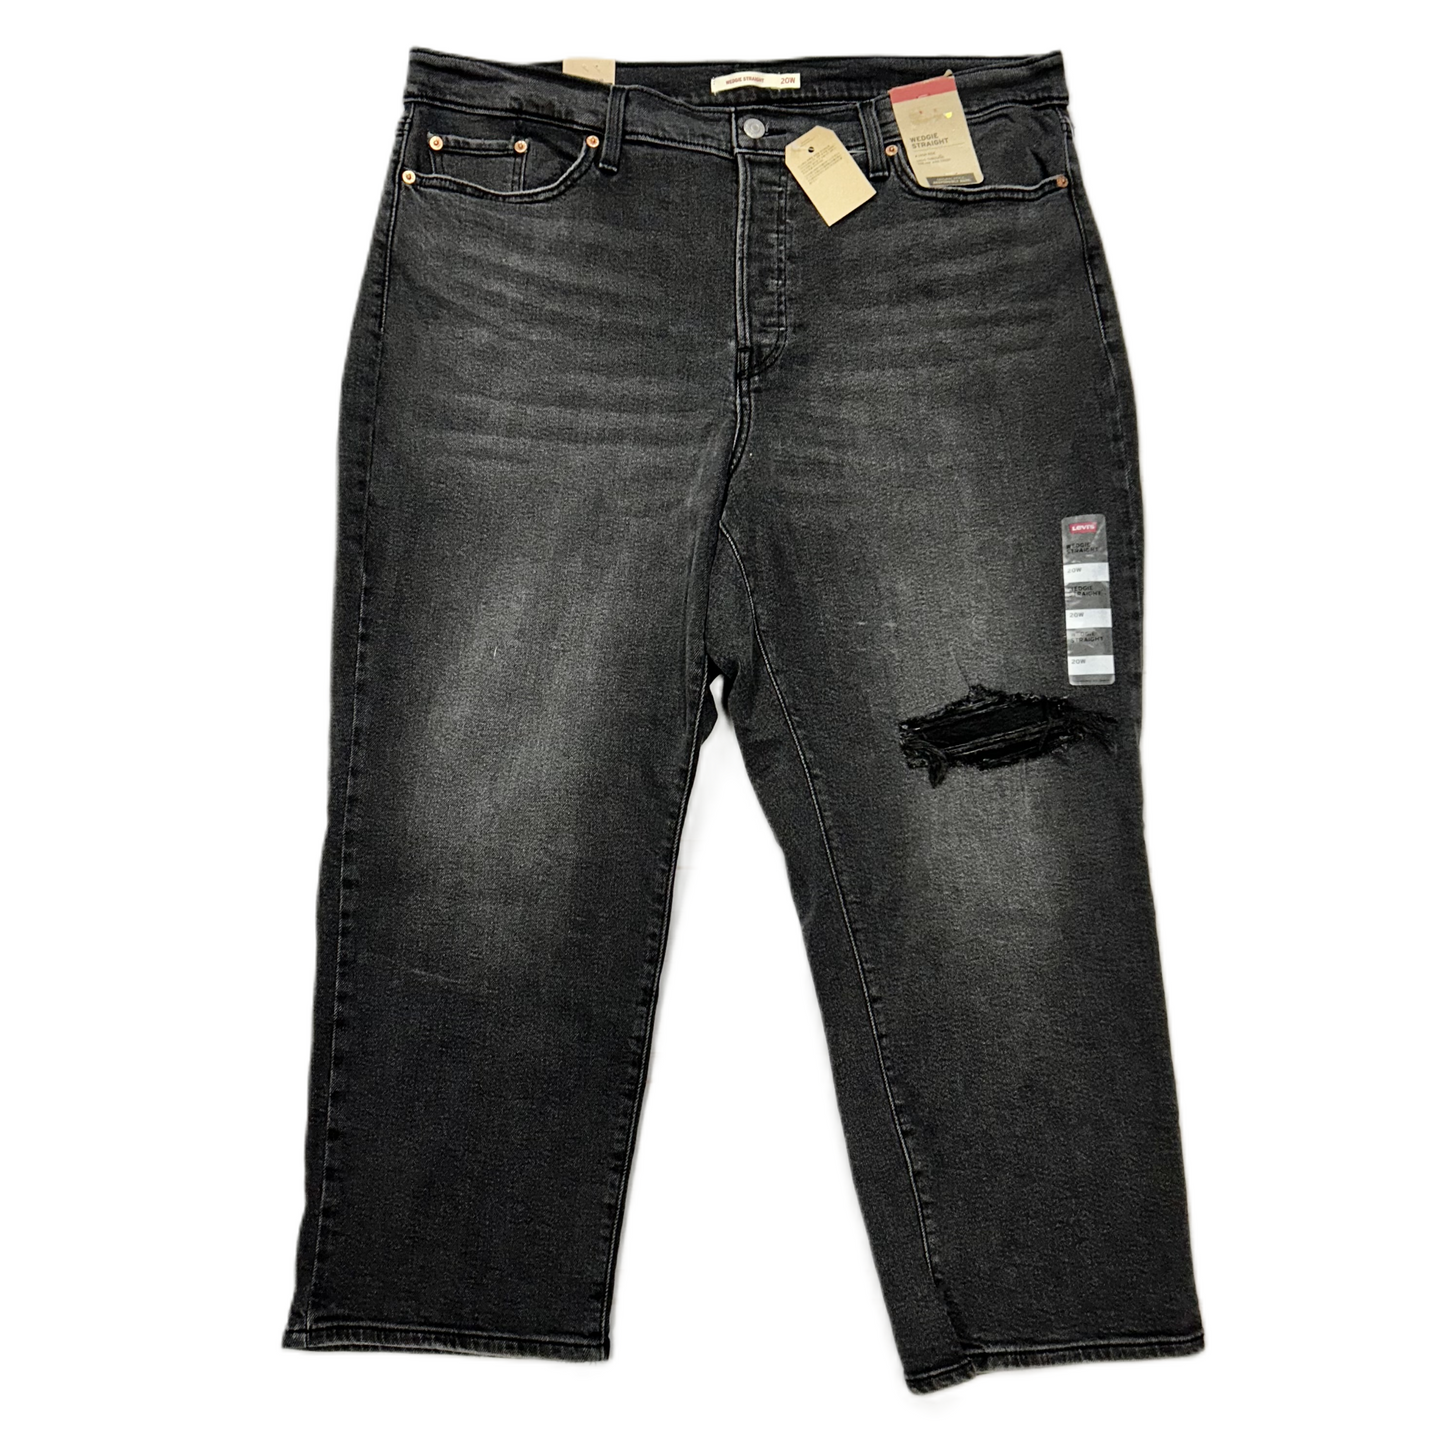 Jeans Straight By Levis  Size: 20w